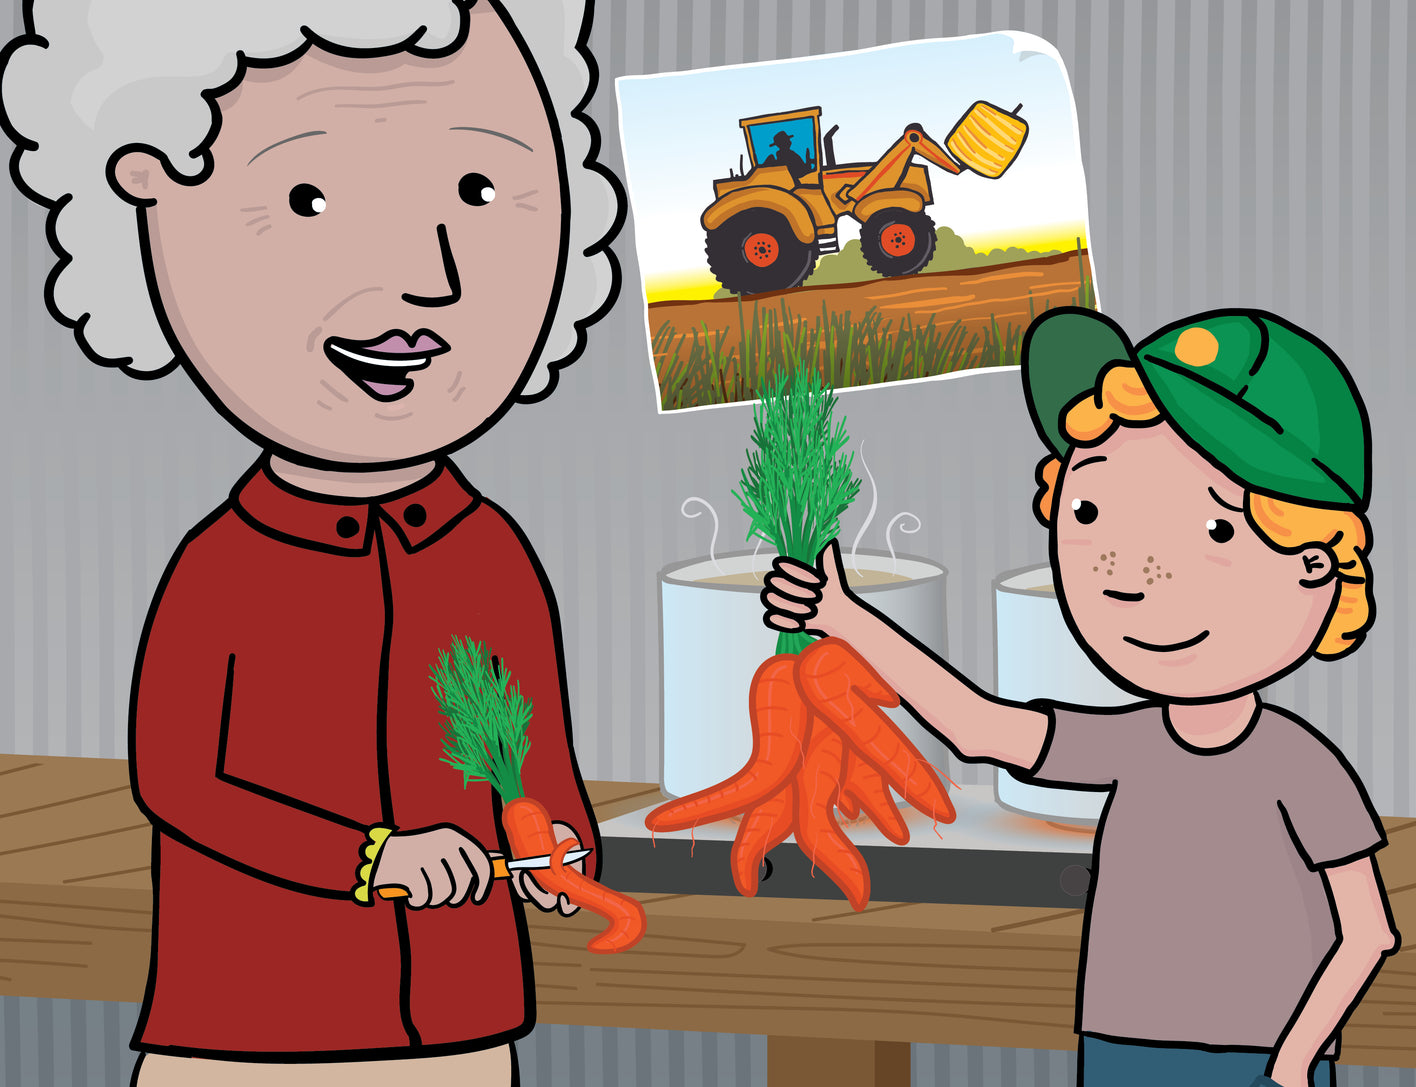 George the Farmer Vegetable Orchestra Picture Book